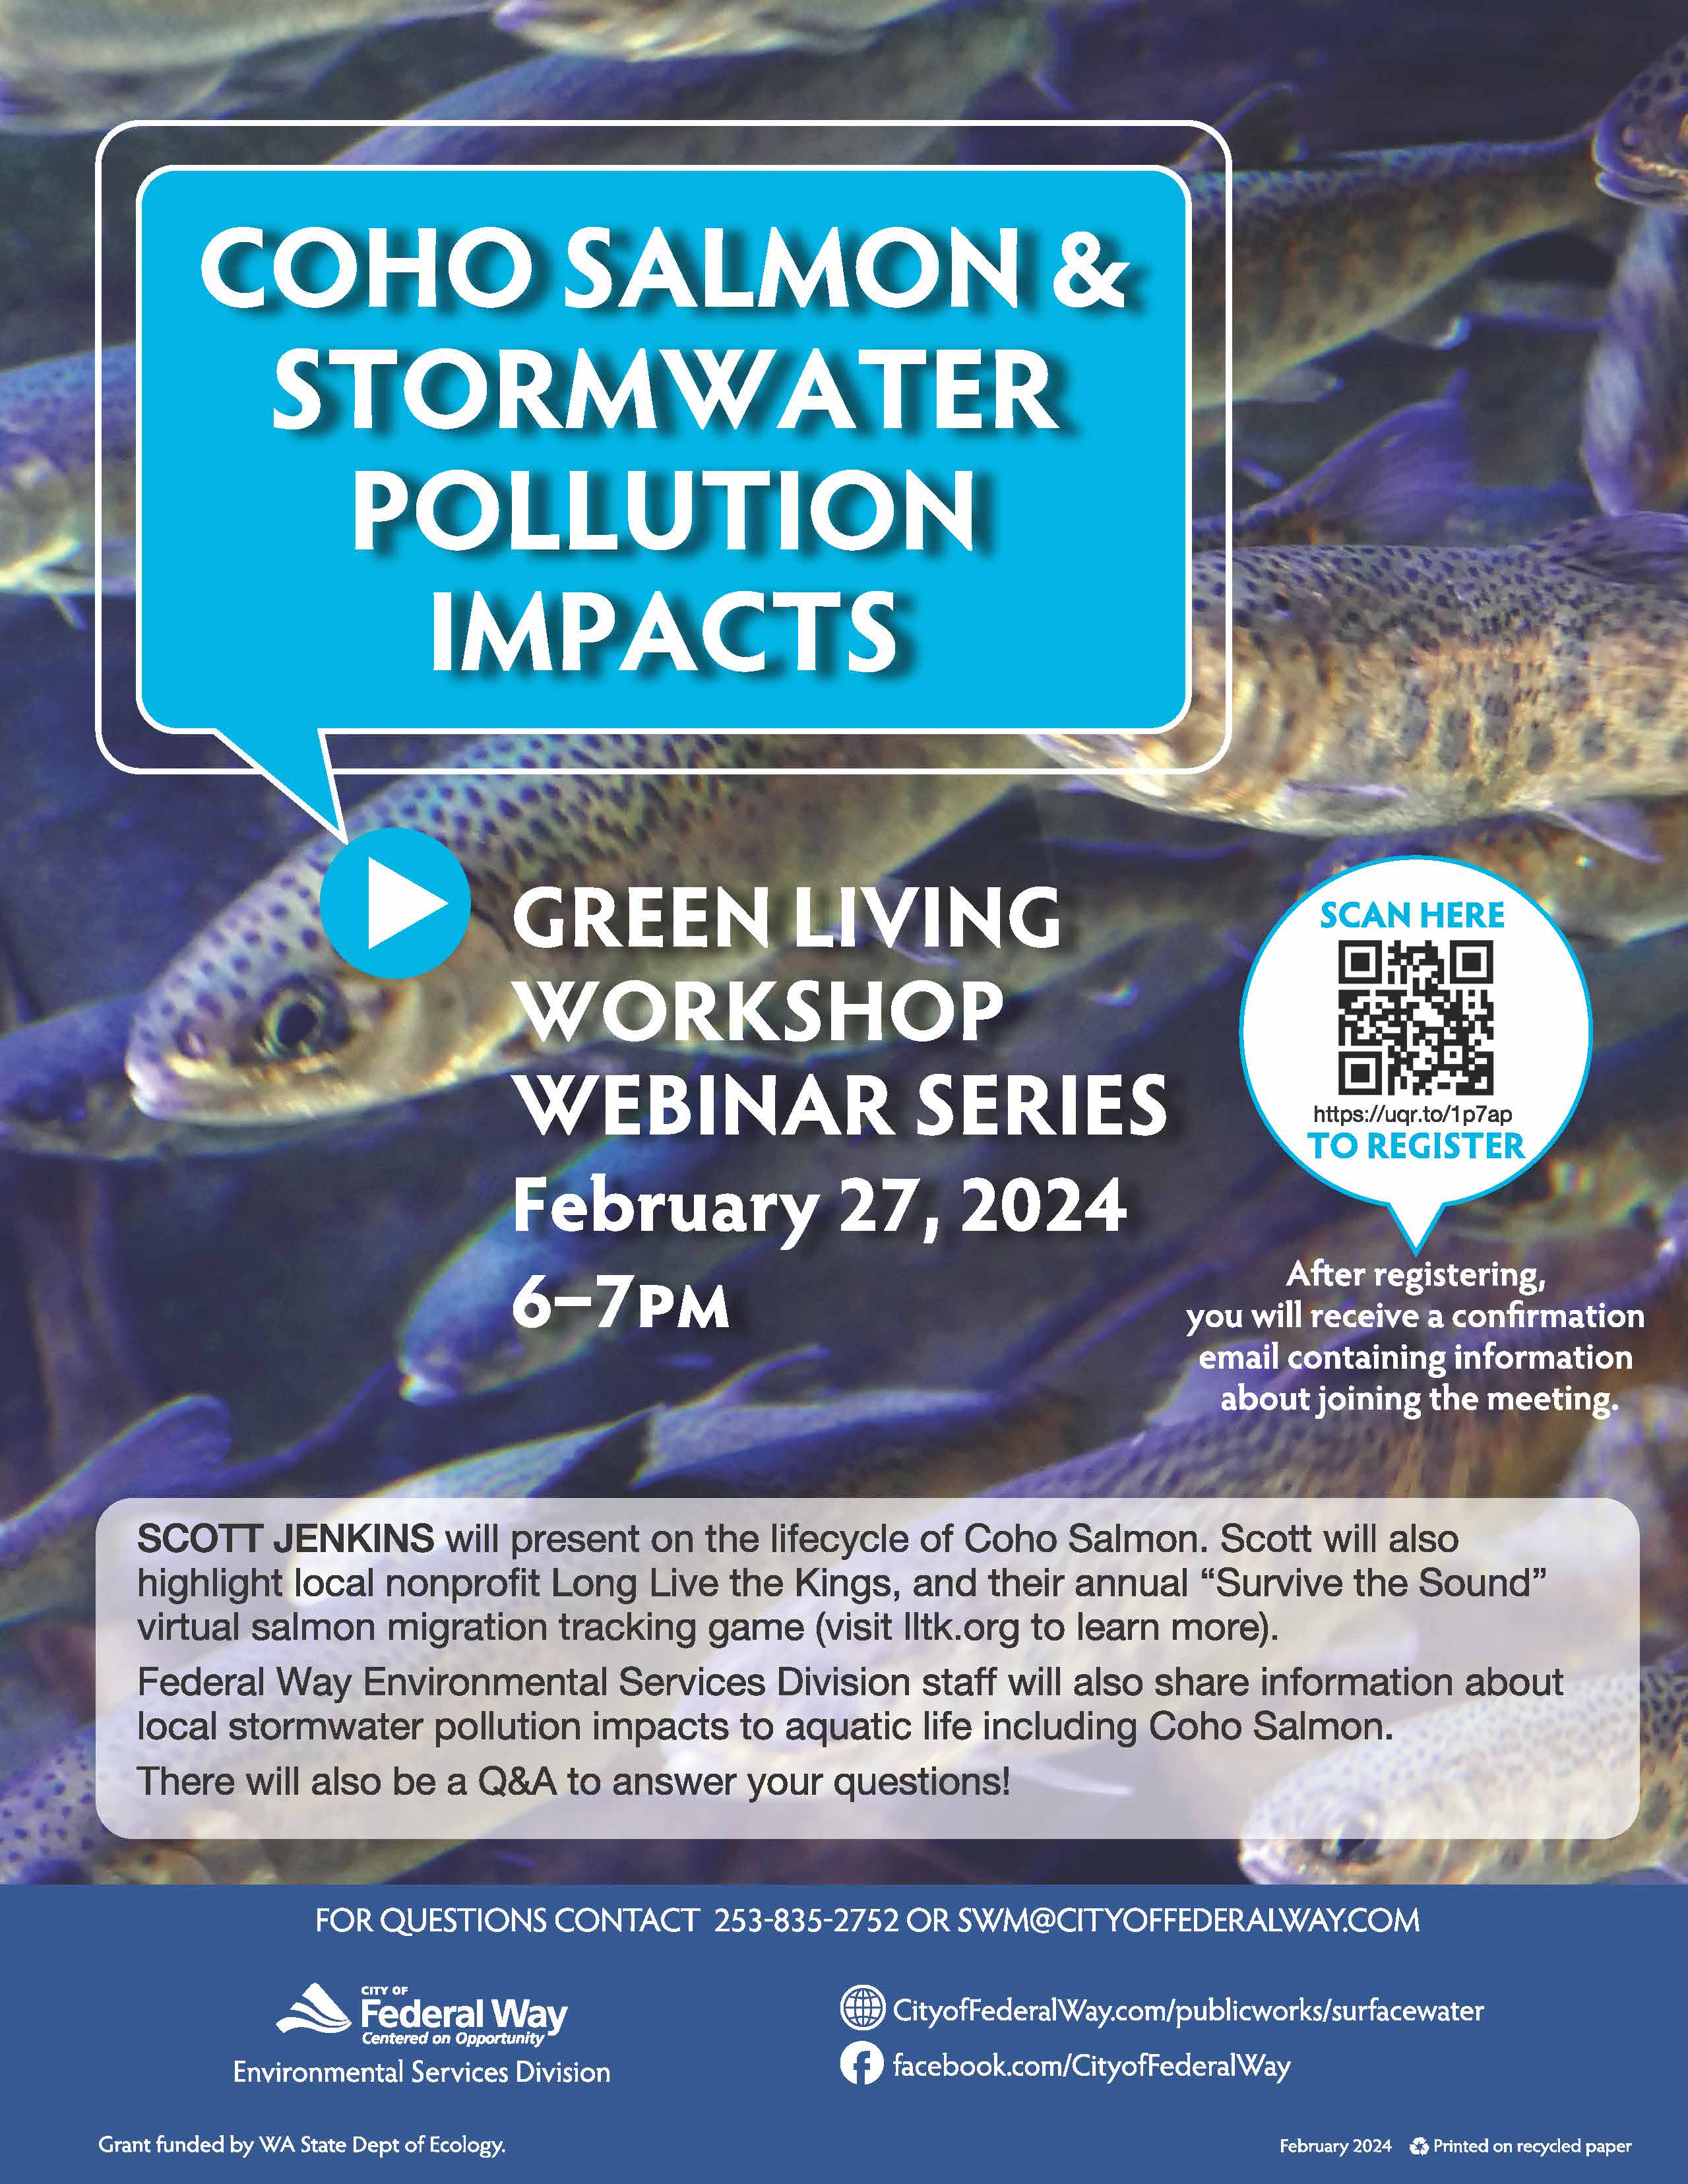 Picture of coho salmon. Coho salmon storm water pollution impacts. Green living workshop webinar series. February 27, 2024 six o'clock to seven o'clock p.m. Register at https://uqr.to/1p7ap. Scott Jenkins will present on the lifecycle of coho salmon, highling local nonprofit Long Live the Kings and their annual Survive the Sound virtual salmon migration tracking game (visit LLTK.org to learn more). Federal Way Environmental Services Division staff will also share information about local storm water pollution impacts to aquatic life, including coho salmon. There will be time for questions and answers.